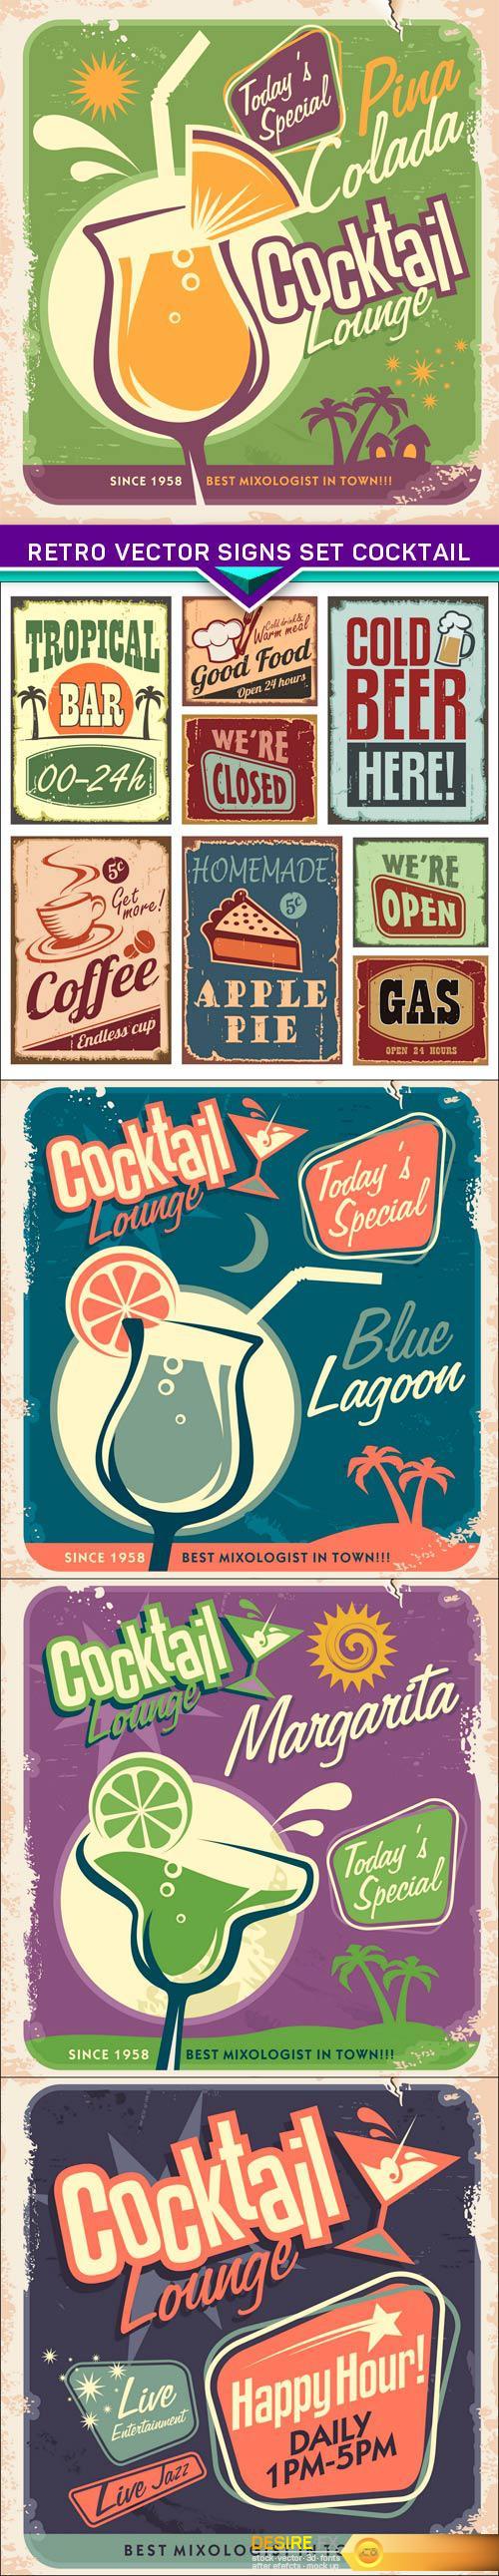 Retro vector signs set cocktail 5x EPS